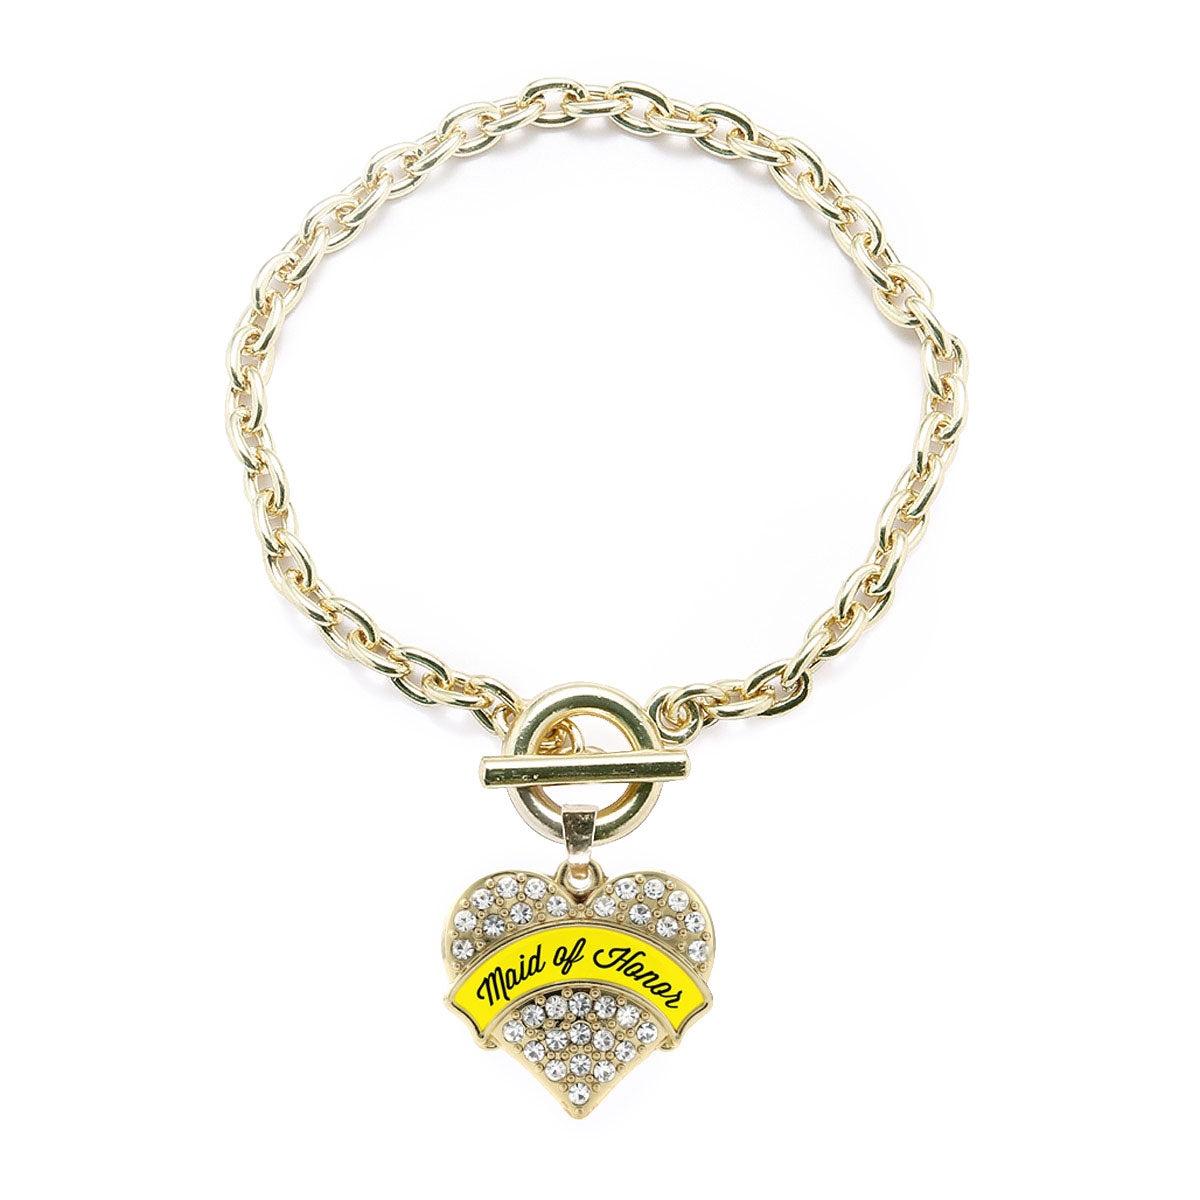 Gold Yellow Maid of Honor Pave Heart Charm Toggle Bracelet